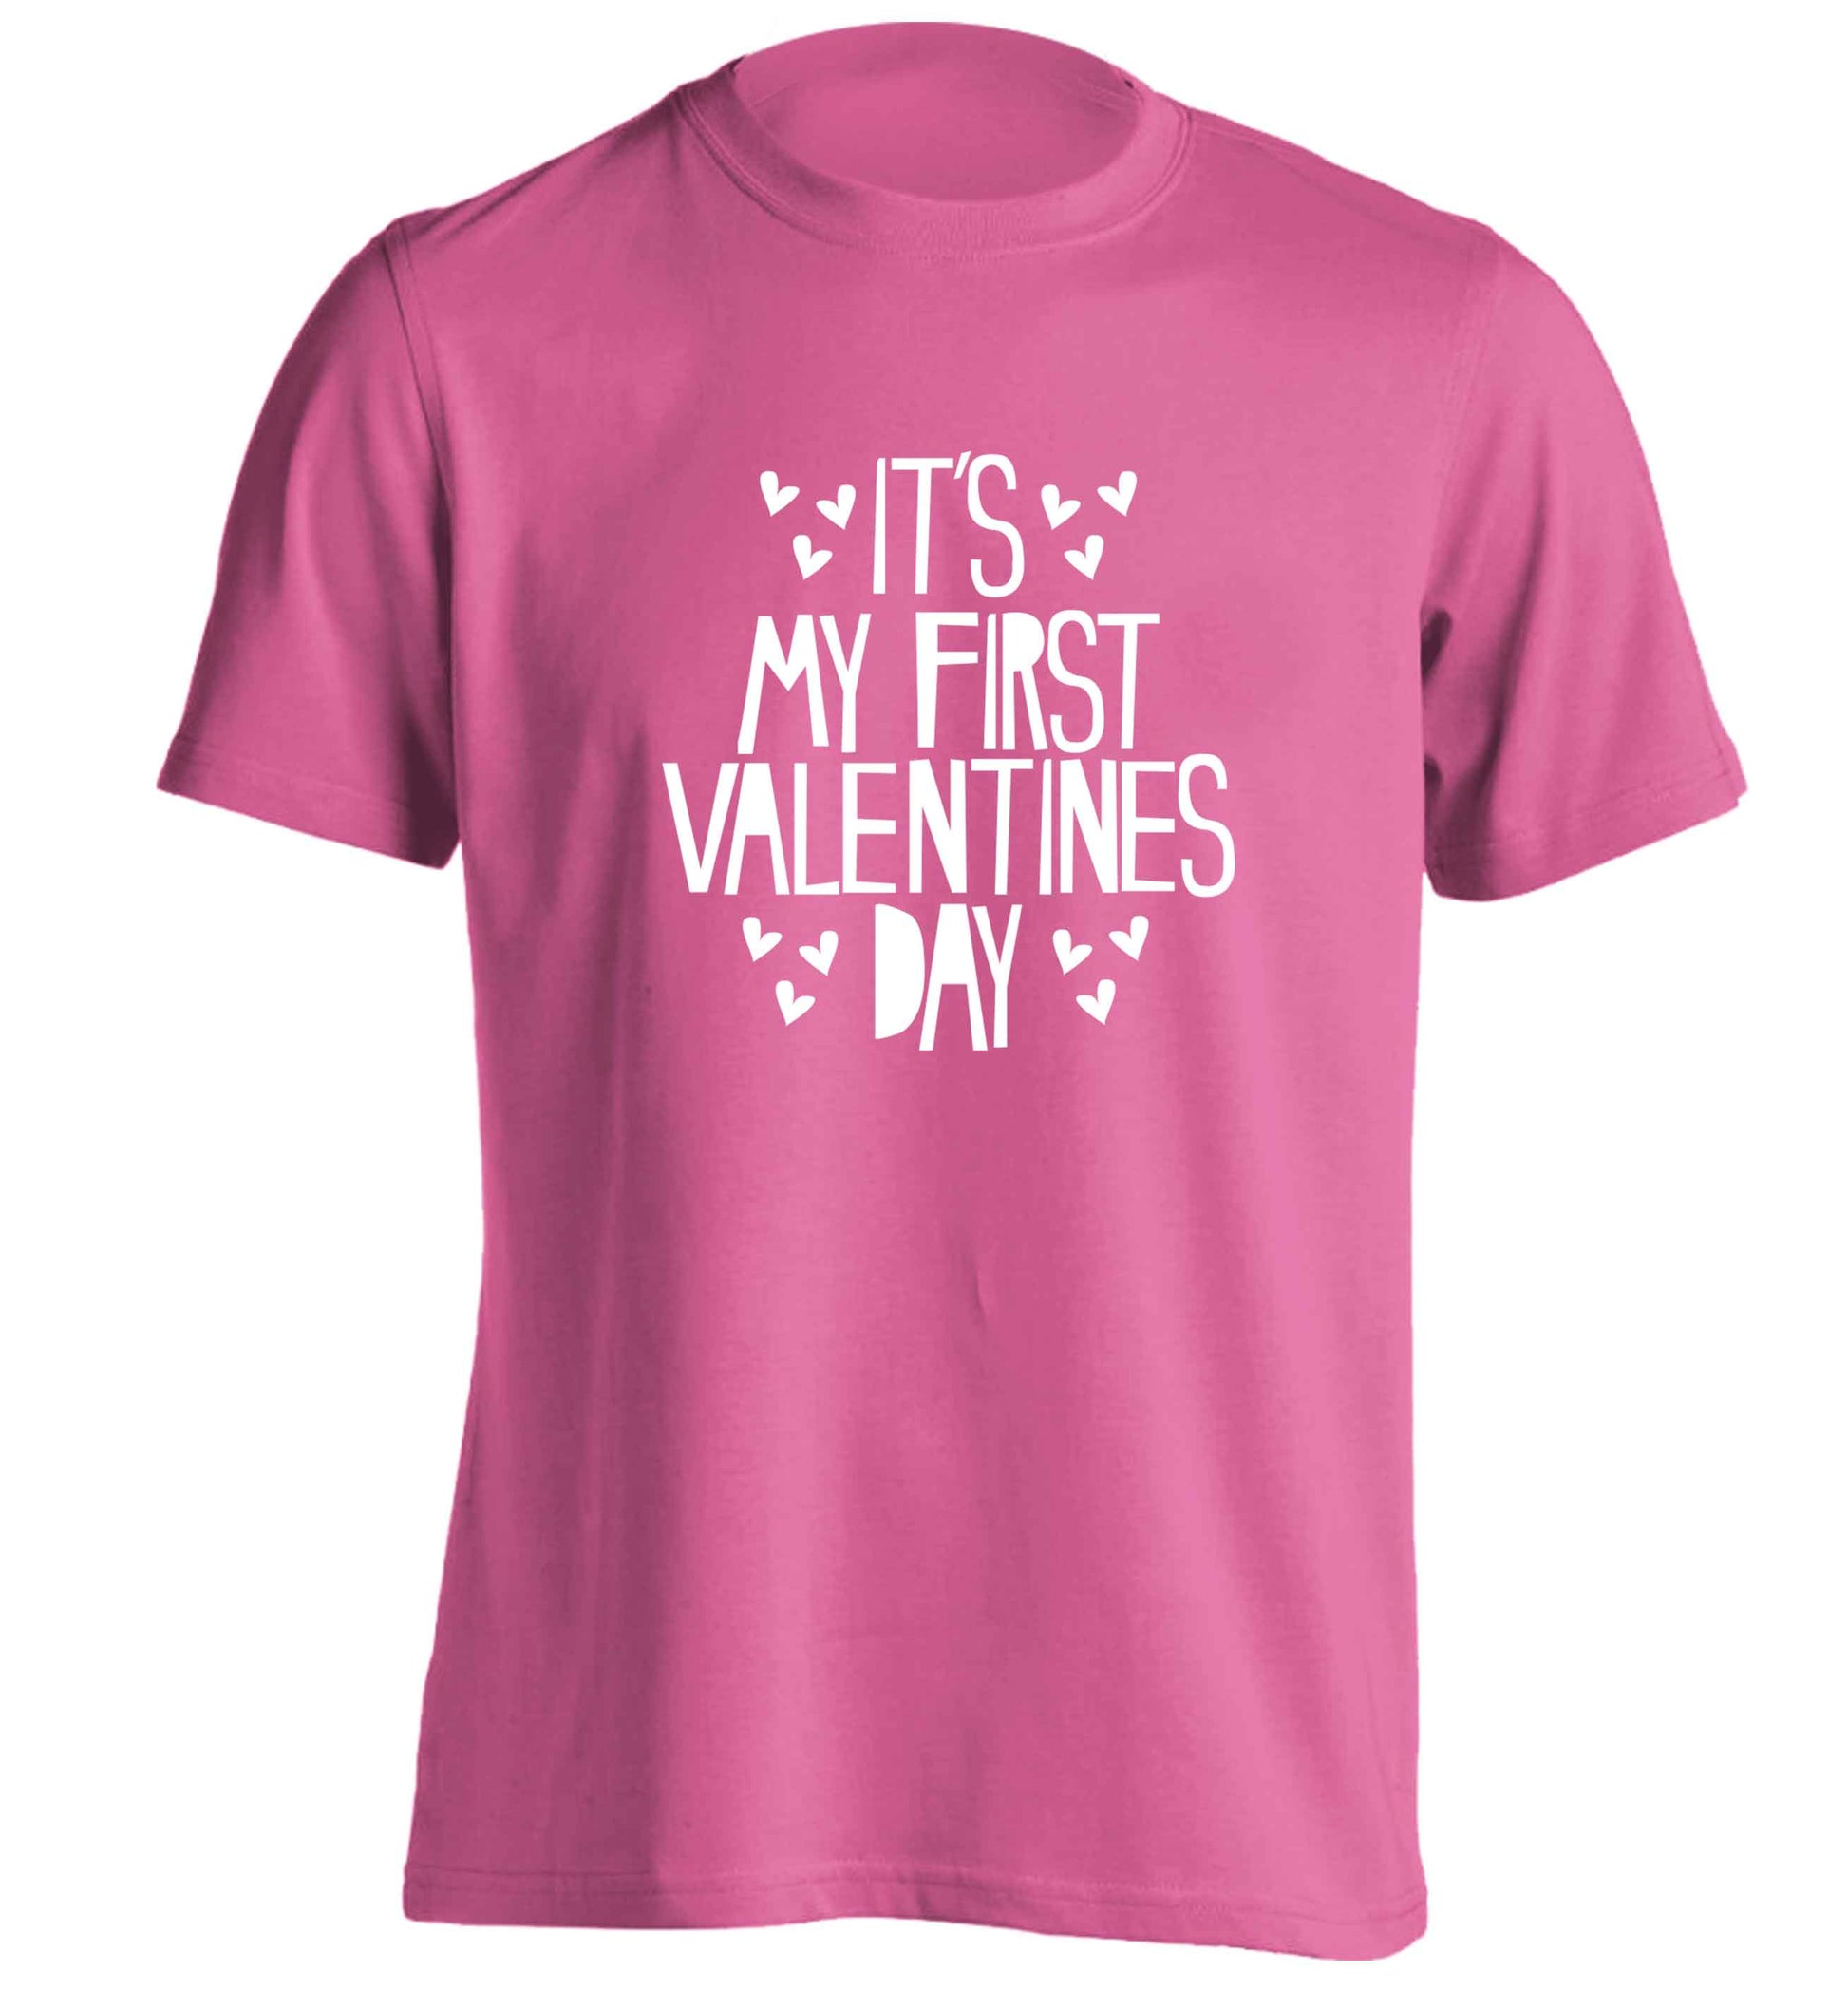 Hearts It's my First Valentine's Day adults unisex pink Tshirt 2XL